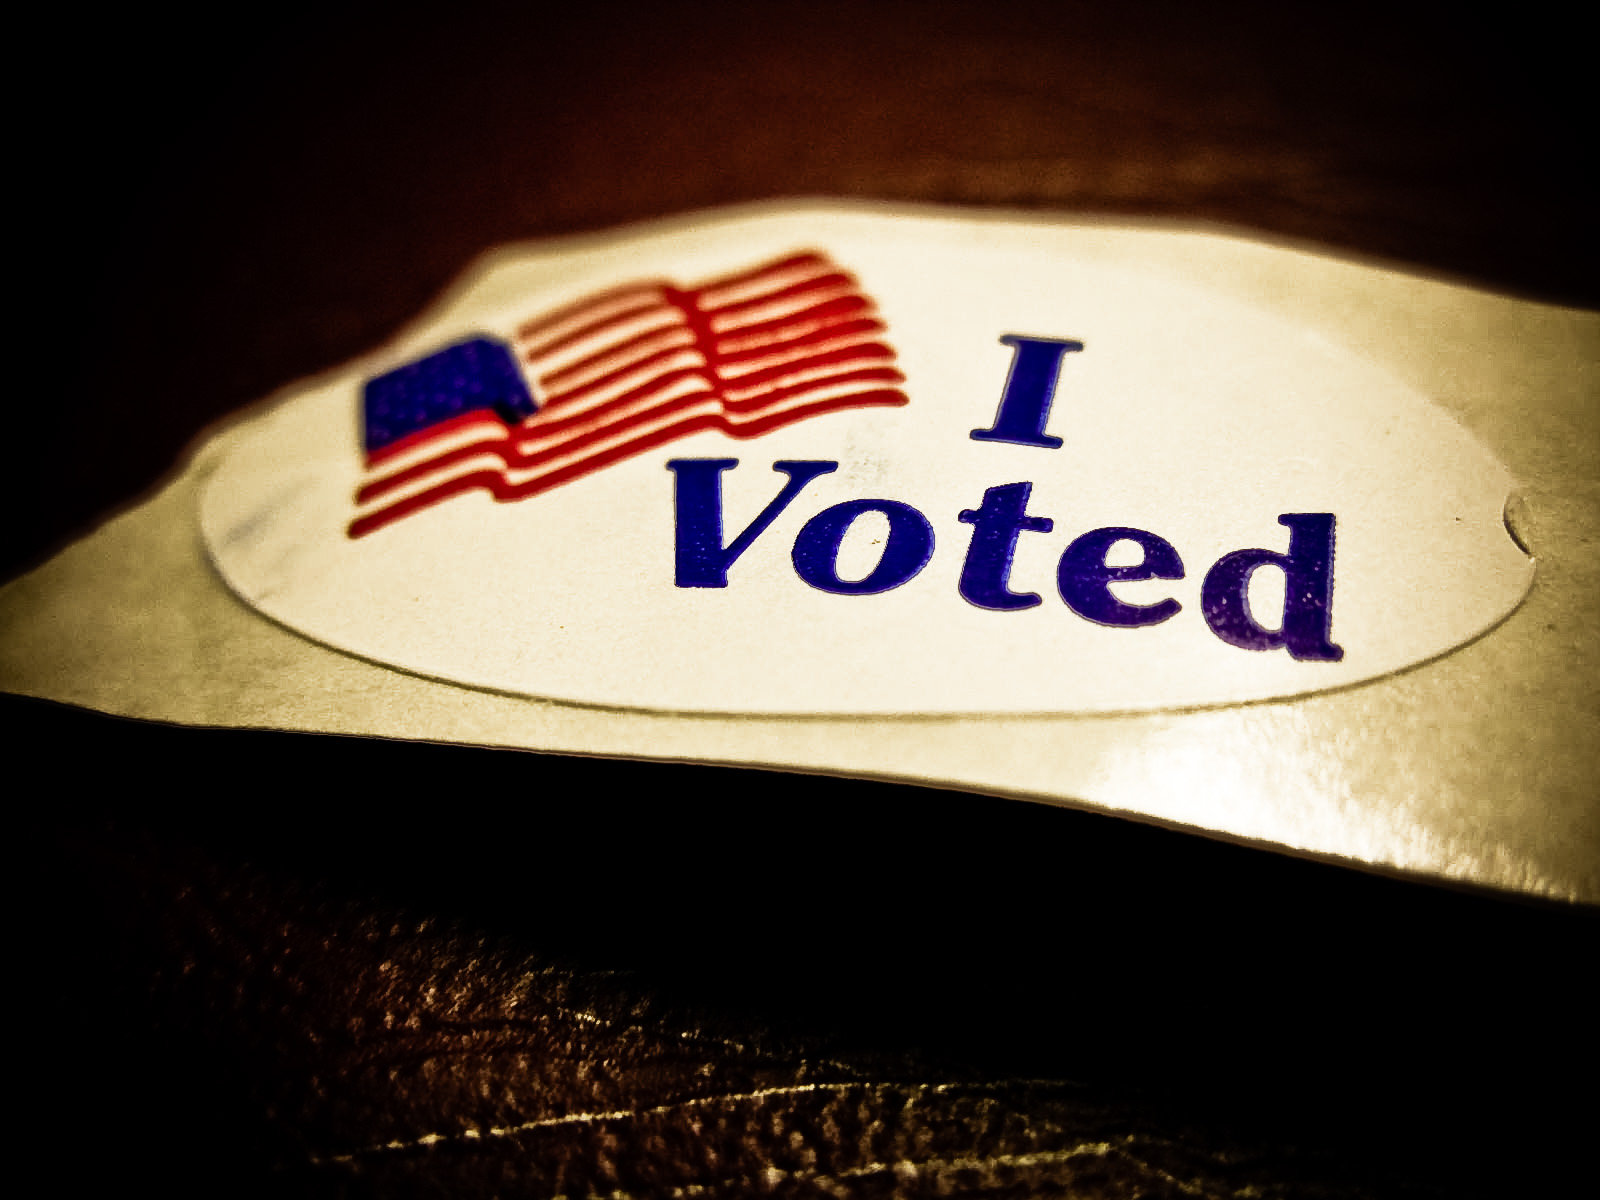 A sticker with the words "I Voted" and the American flag image next to it lays on a table. Photo courtesy of Flickr-Photo Sharing.